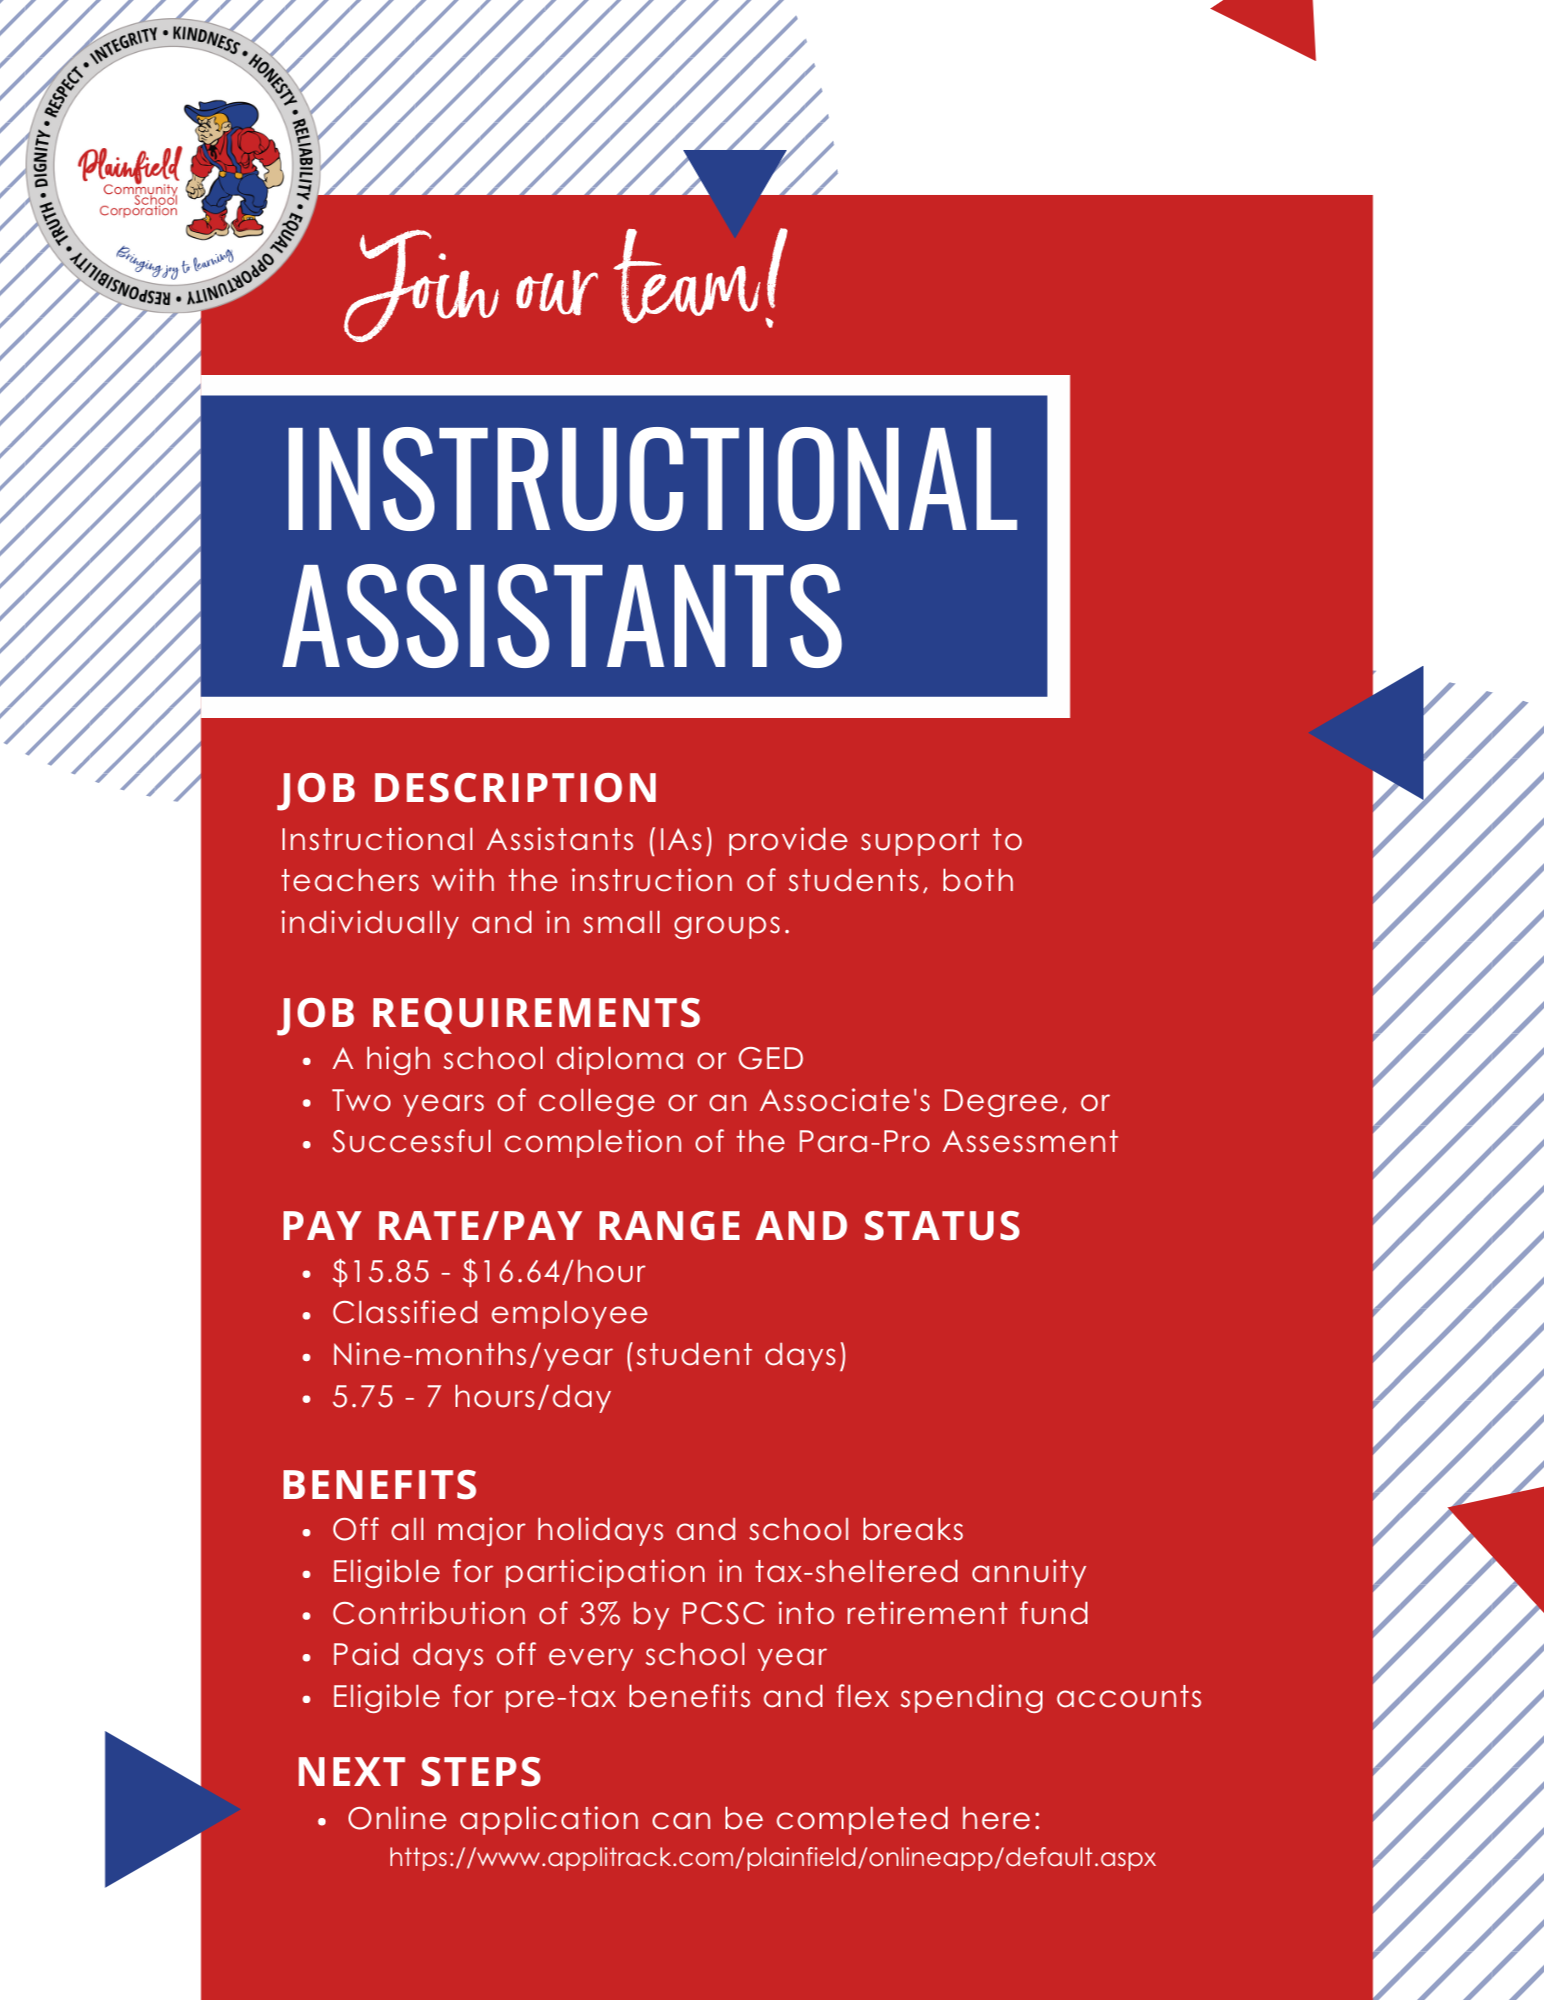 Details about being an Instructional Assistant in Plainfield Schools